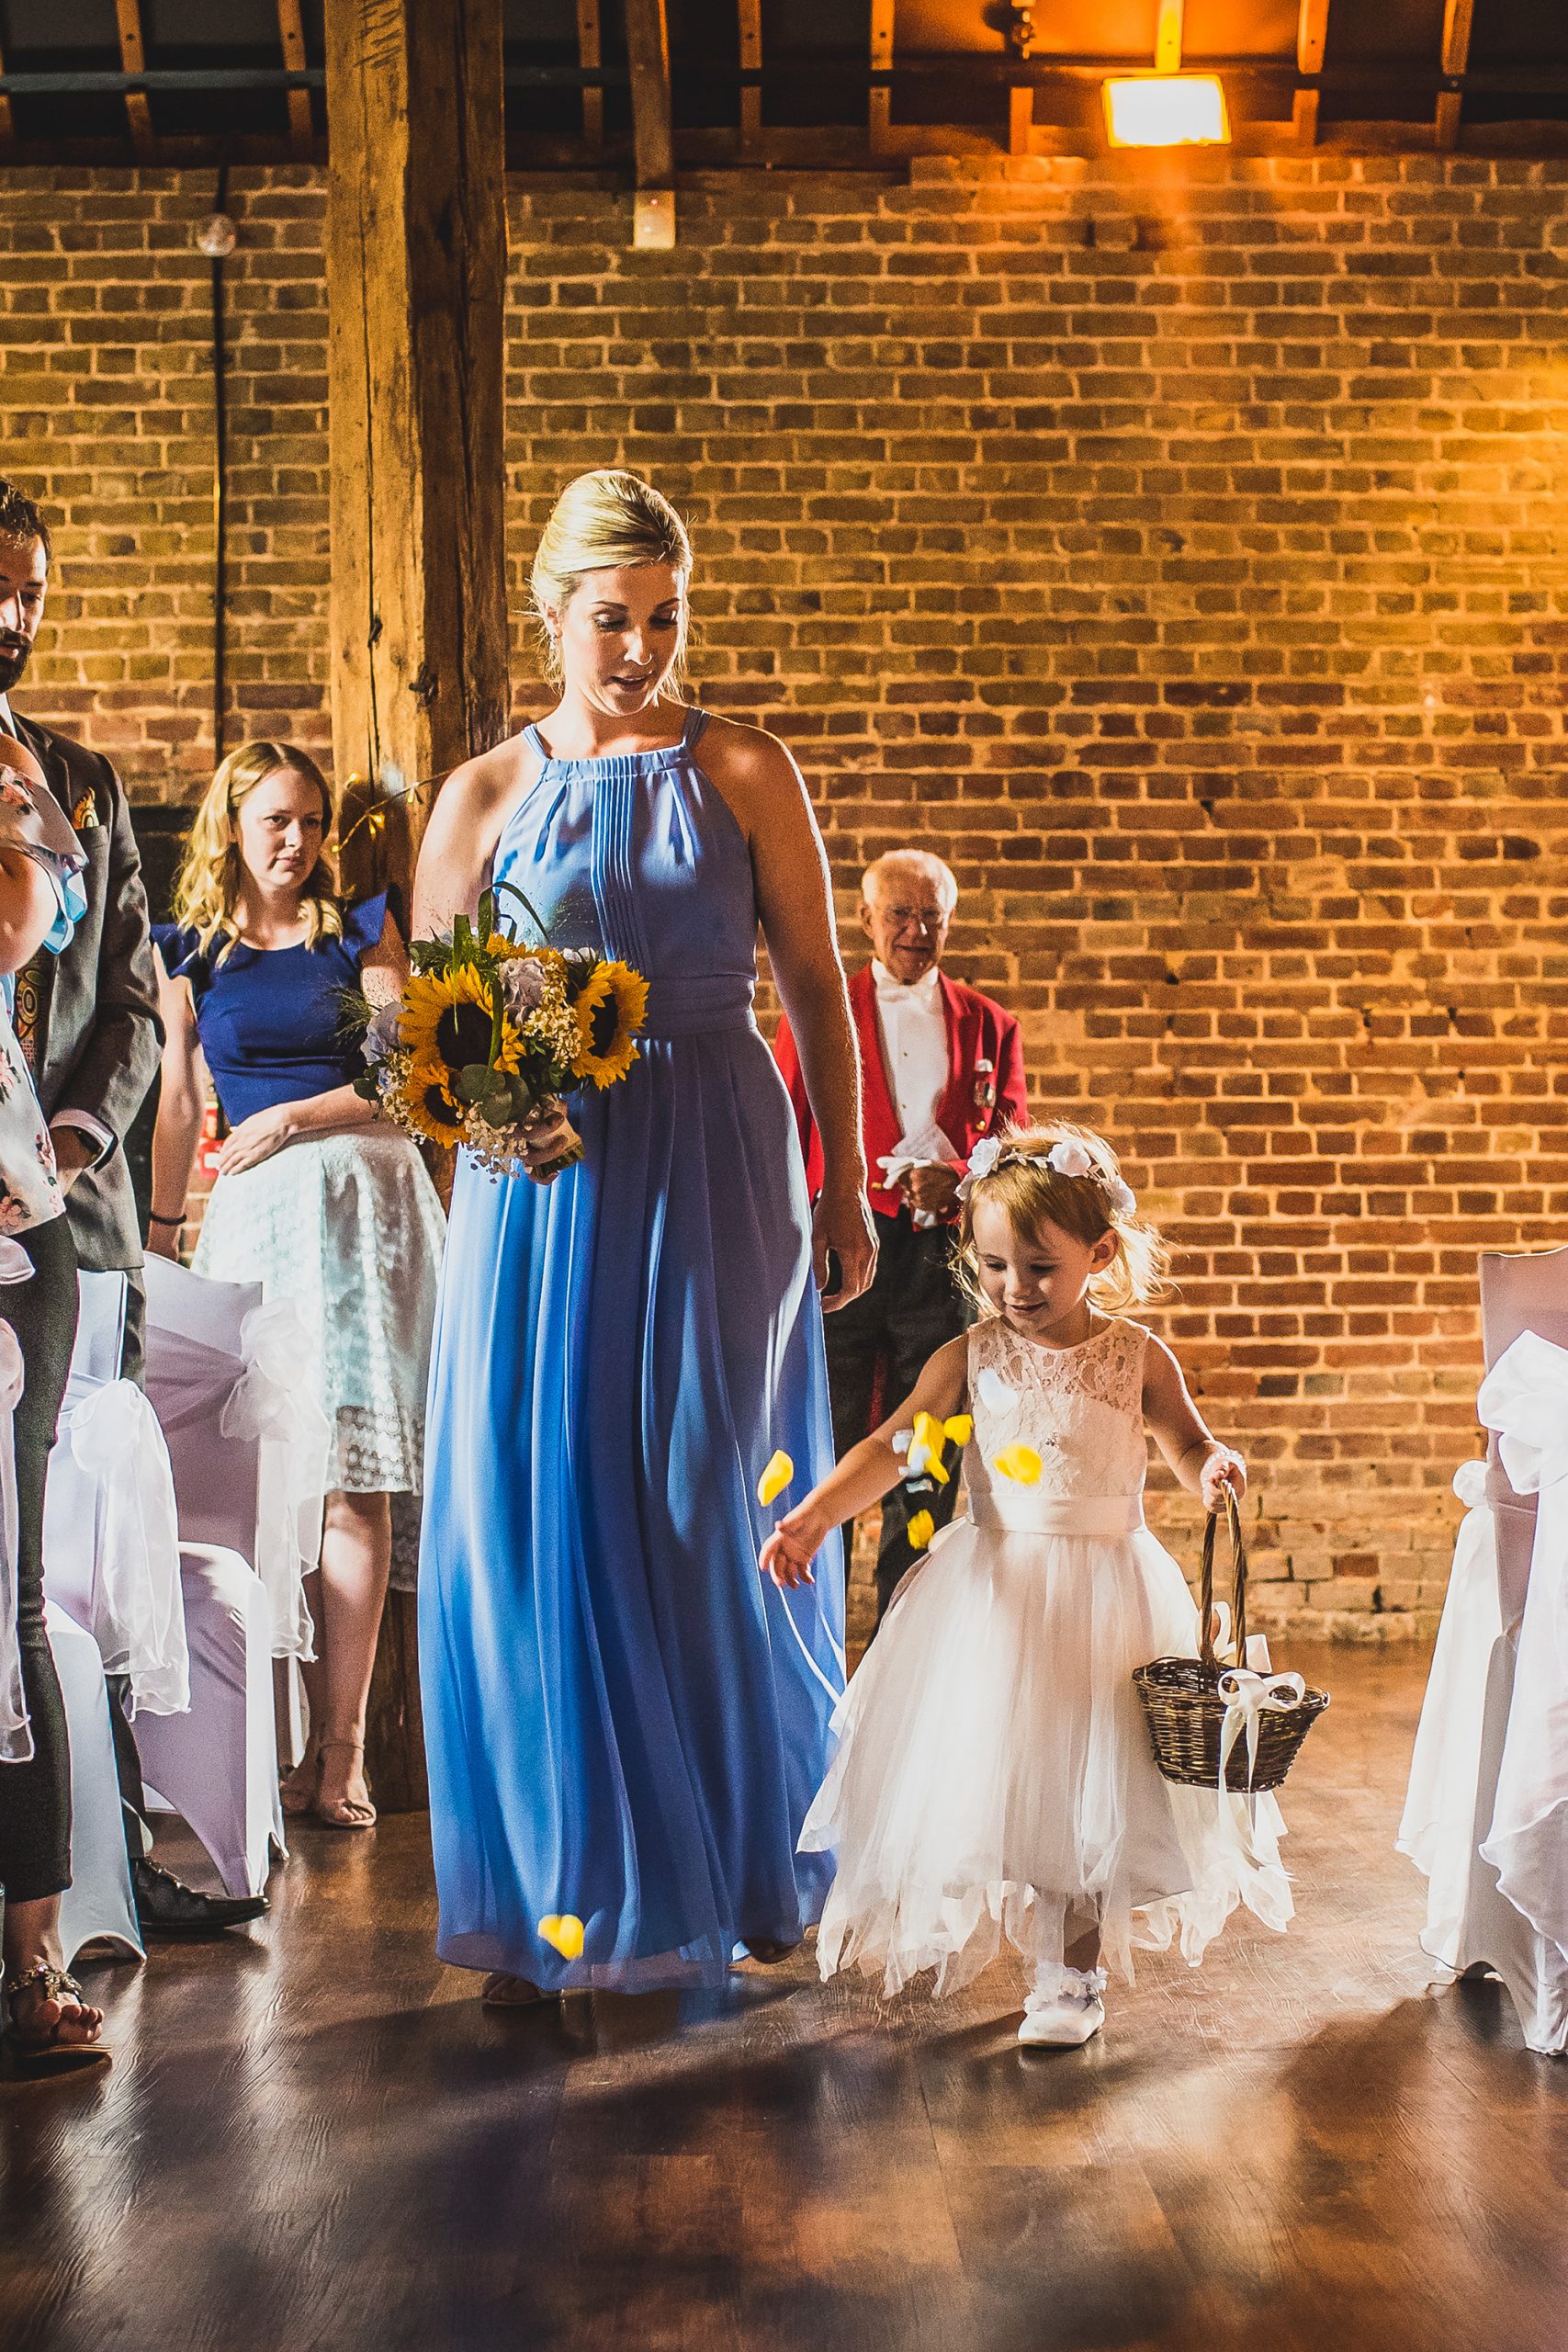 Ellie Andy Rustic Barn Wedding Damien Vickers Photography SBS 010 scaled